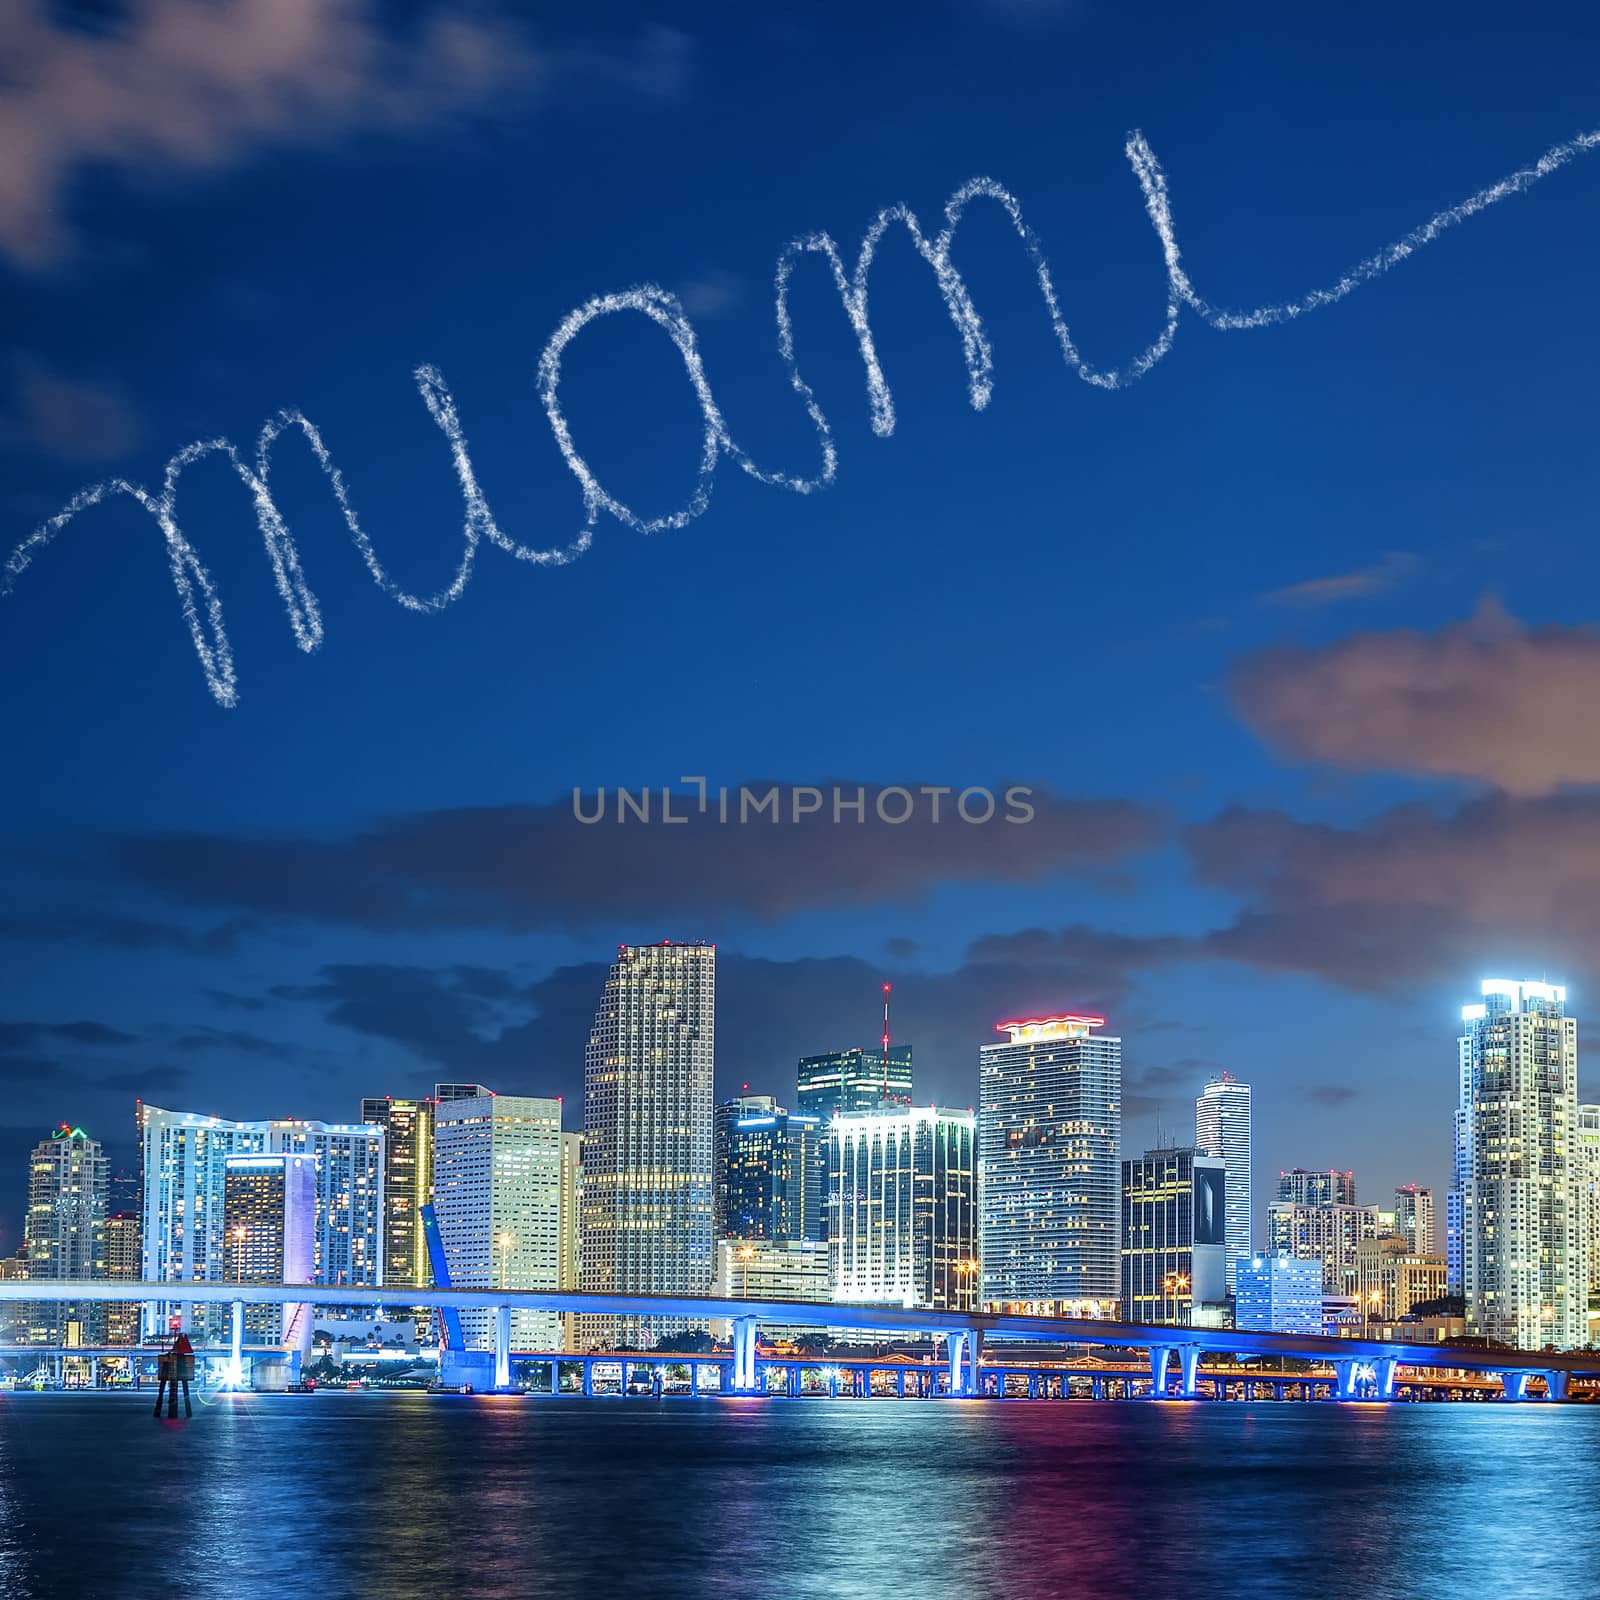 Miami in the sky by vwalakte